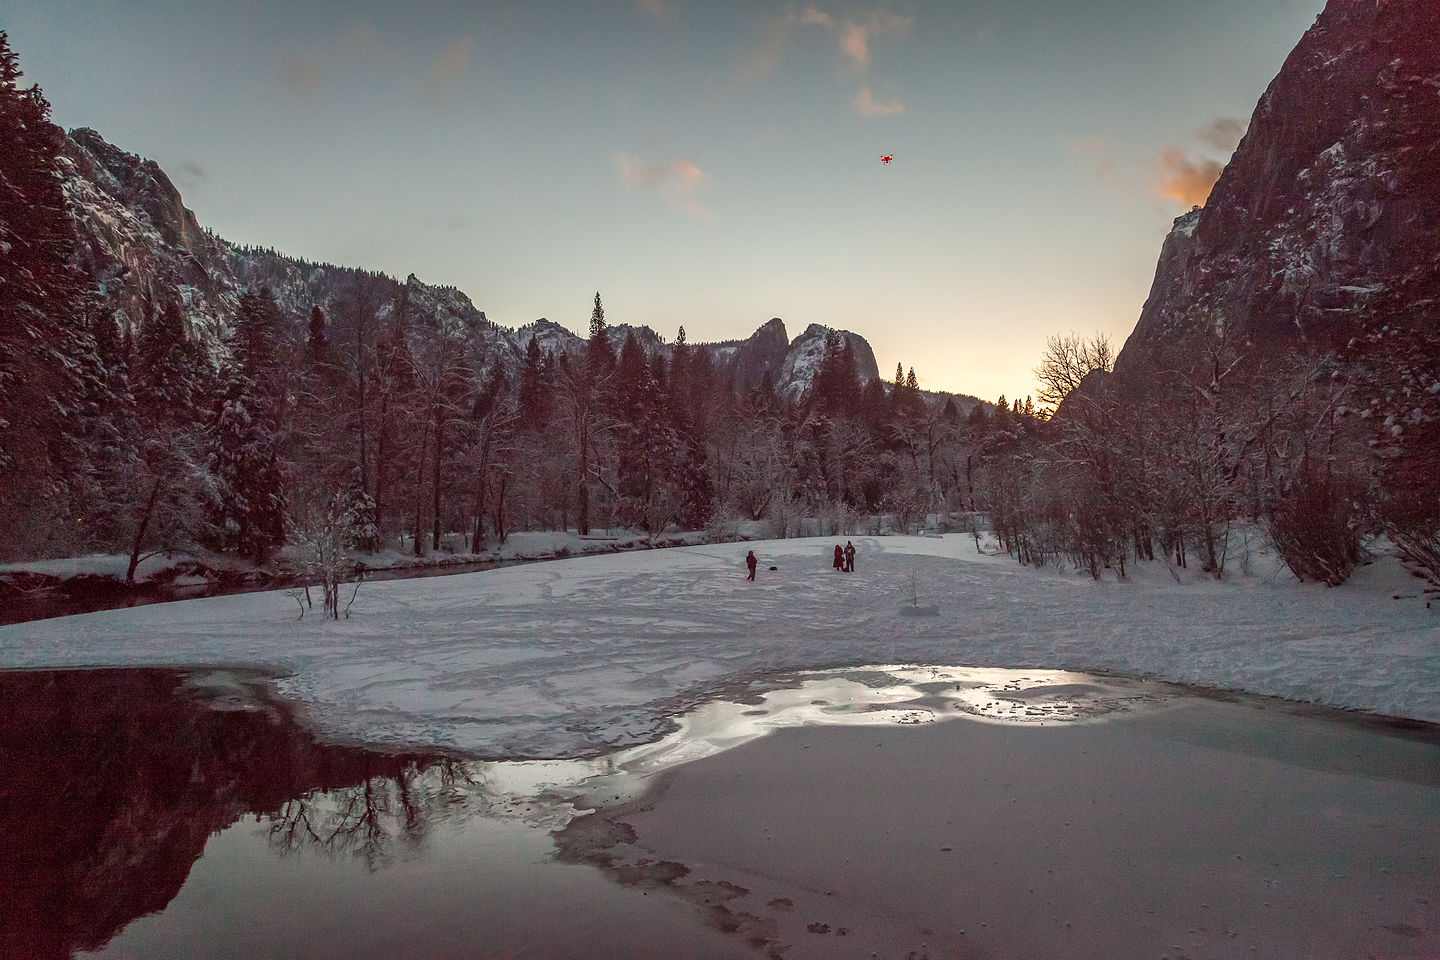 Tiny Drone over Merced River